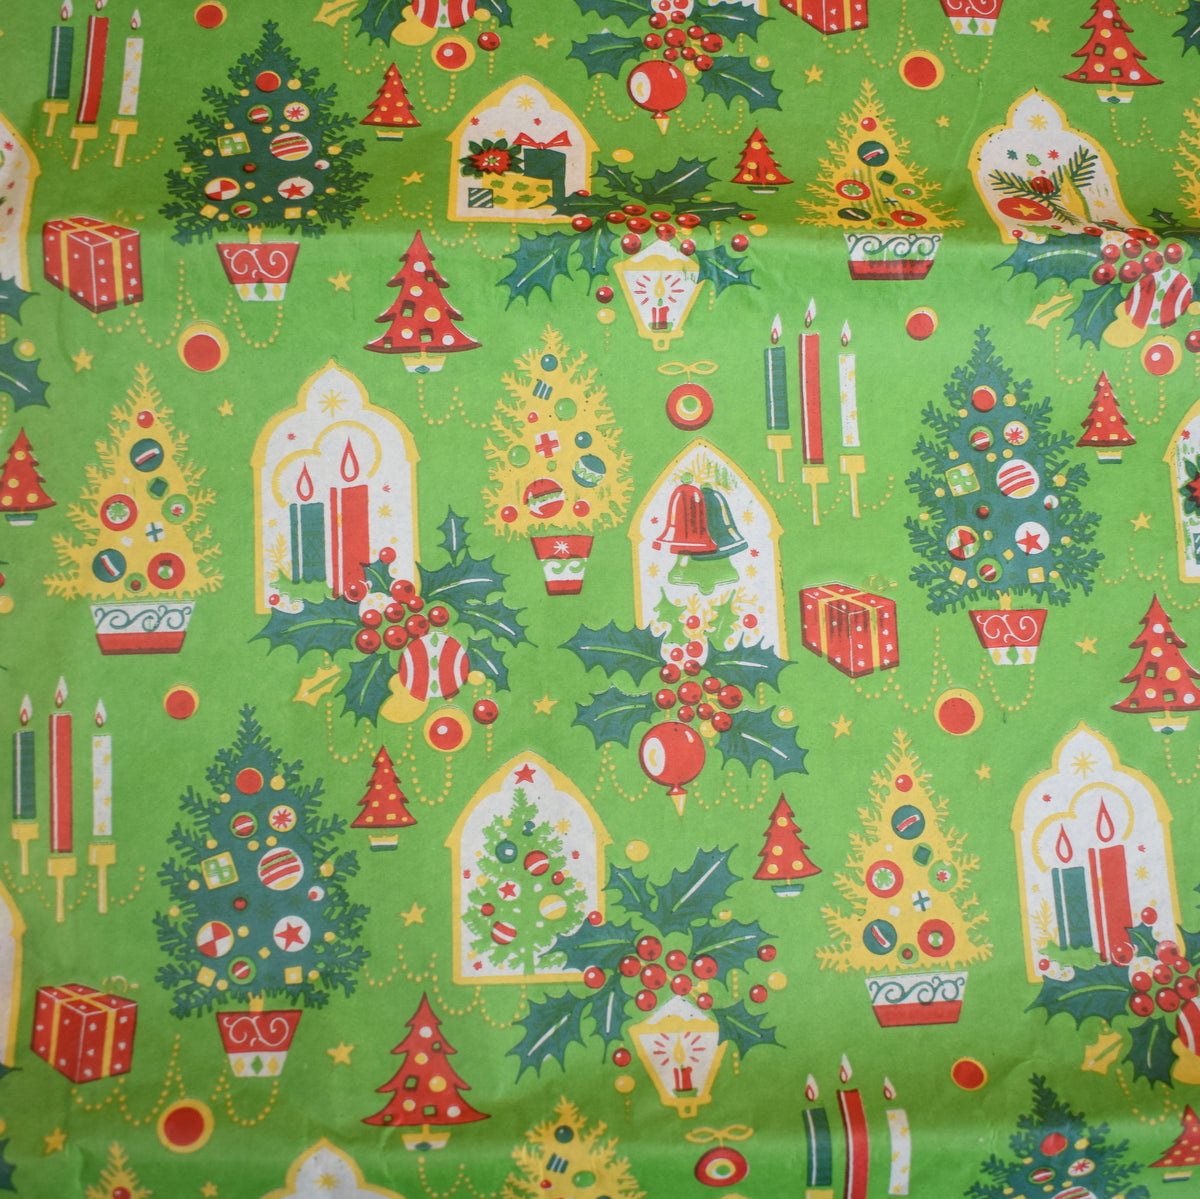 Retro Vintage 1950s Christmas Wrapping Paper, Mid Century Modern